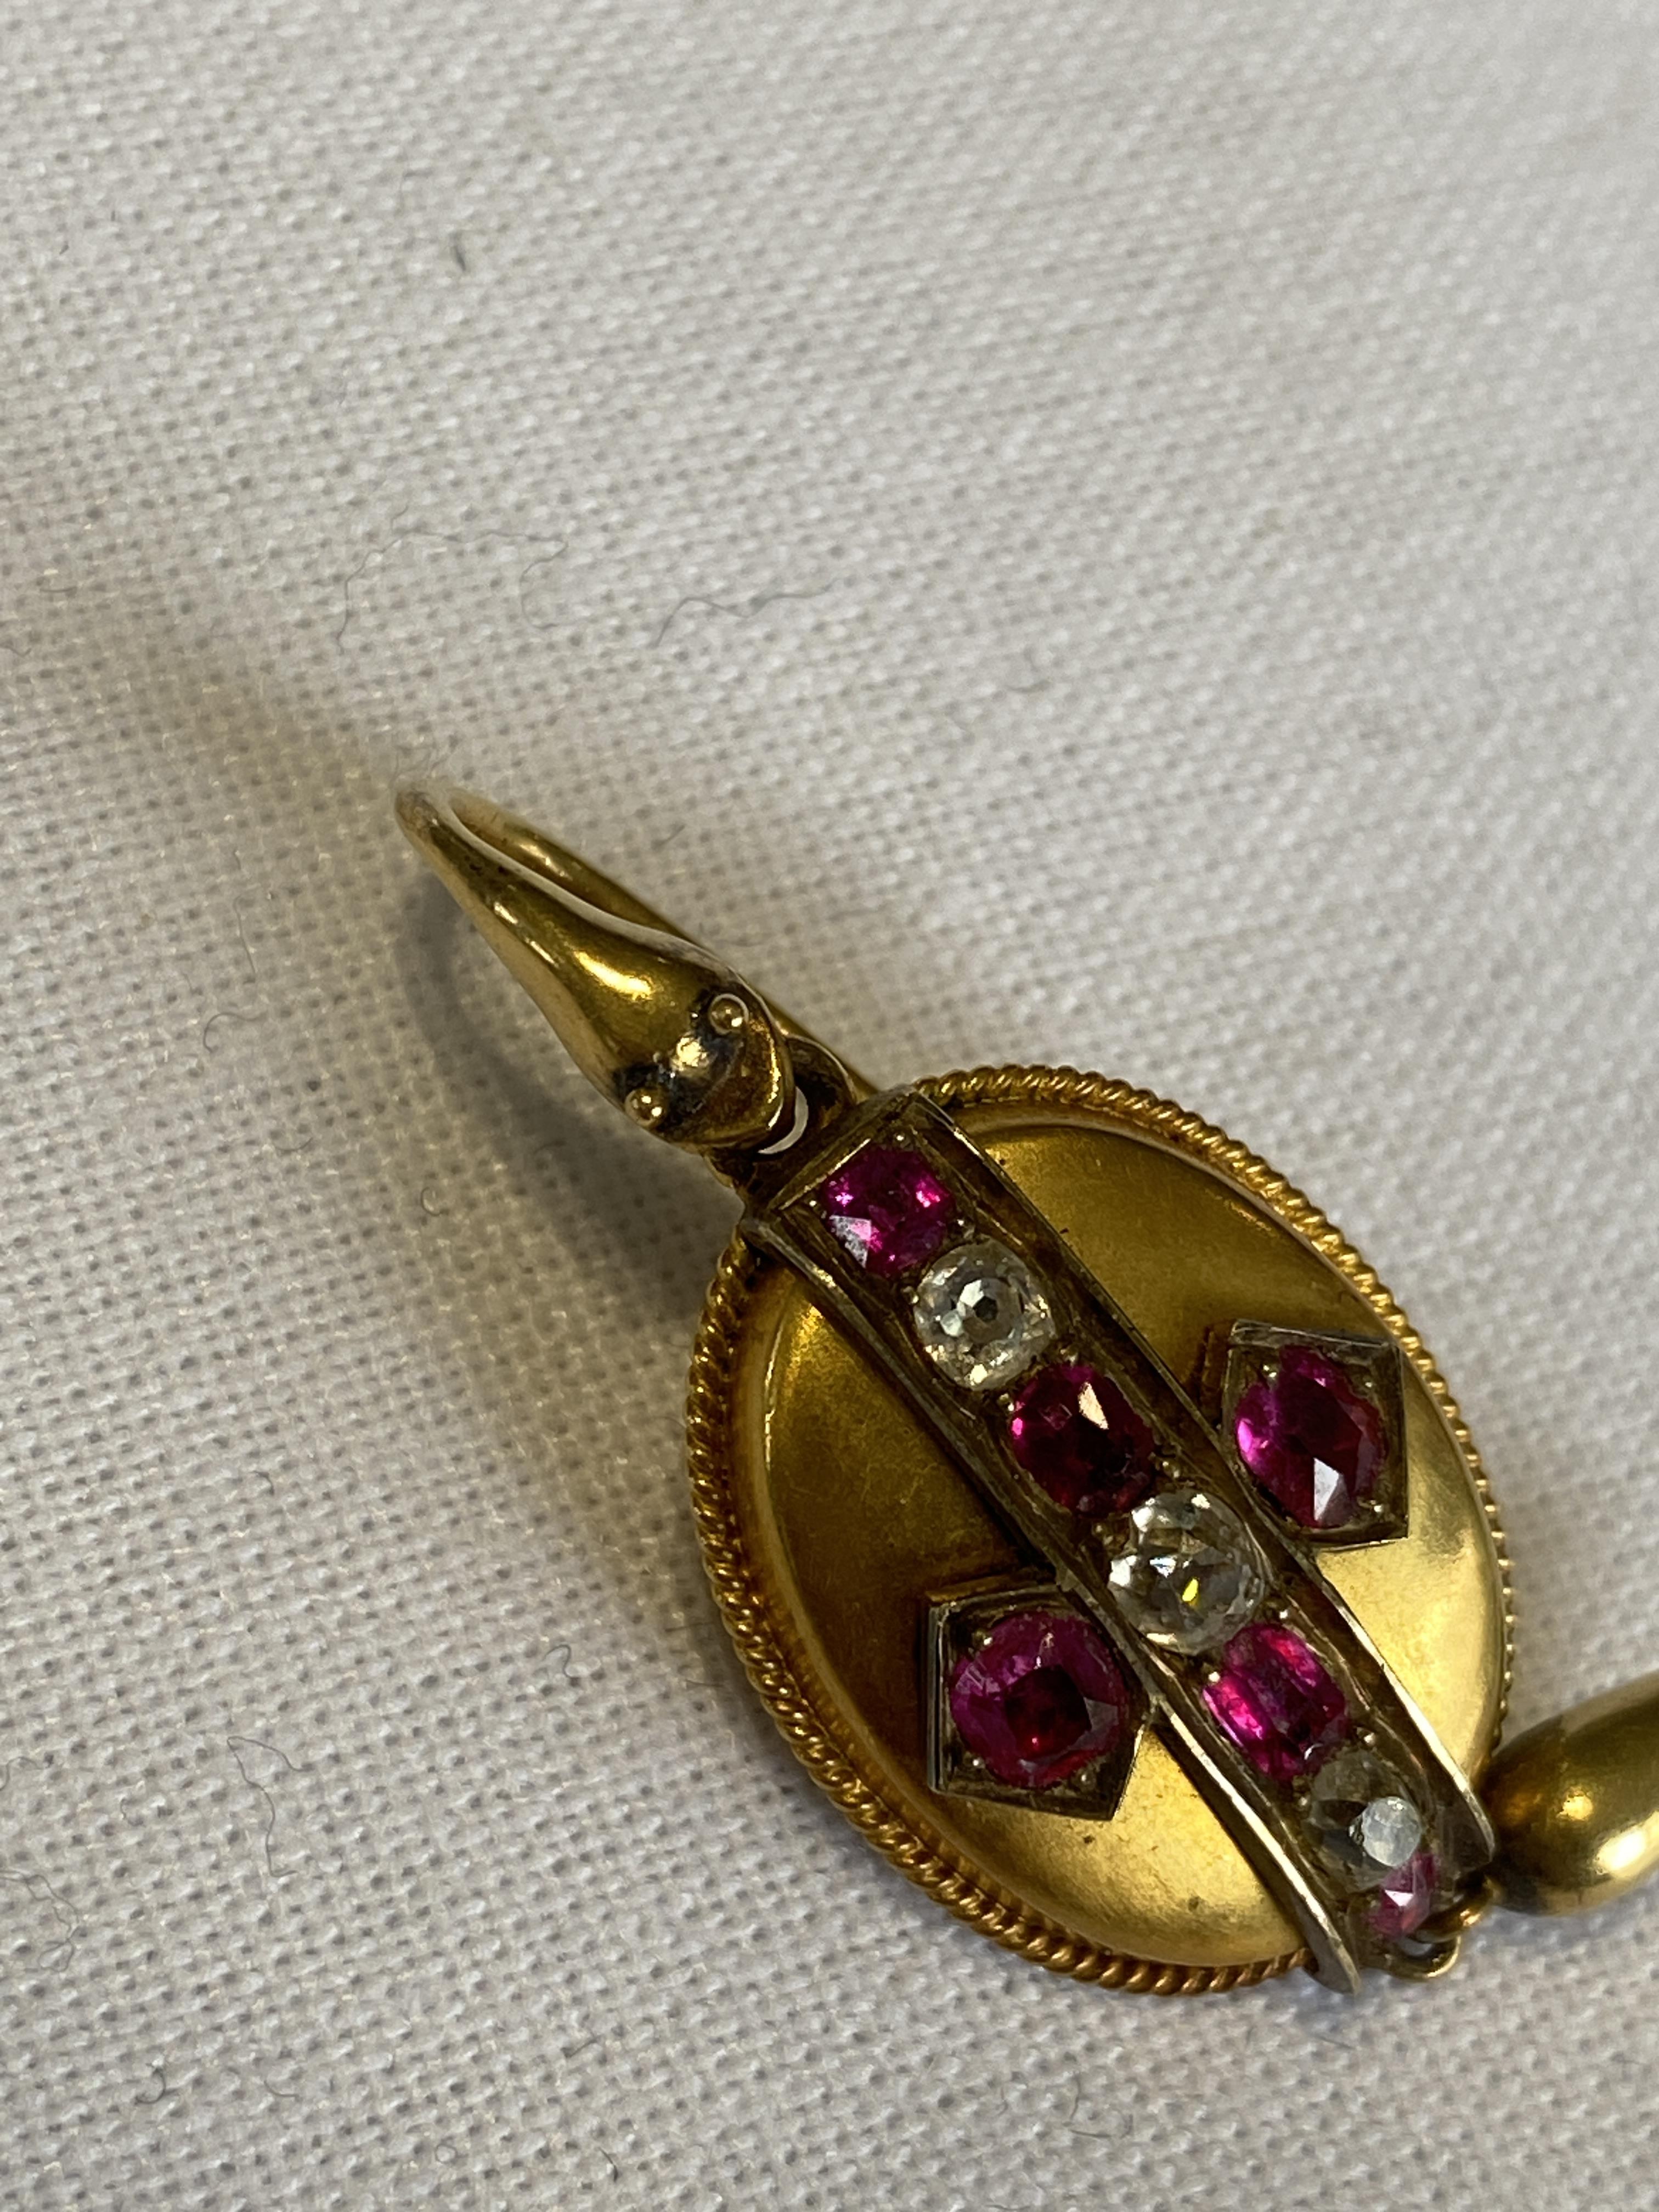 A pair of mid 19th century yellow gold and gem-set ear pendants - Image 3 of 3